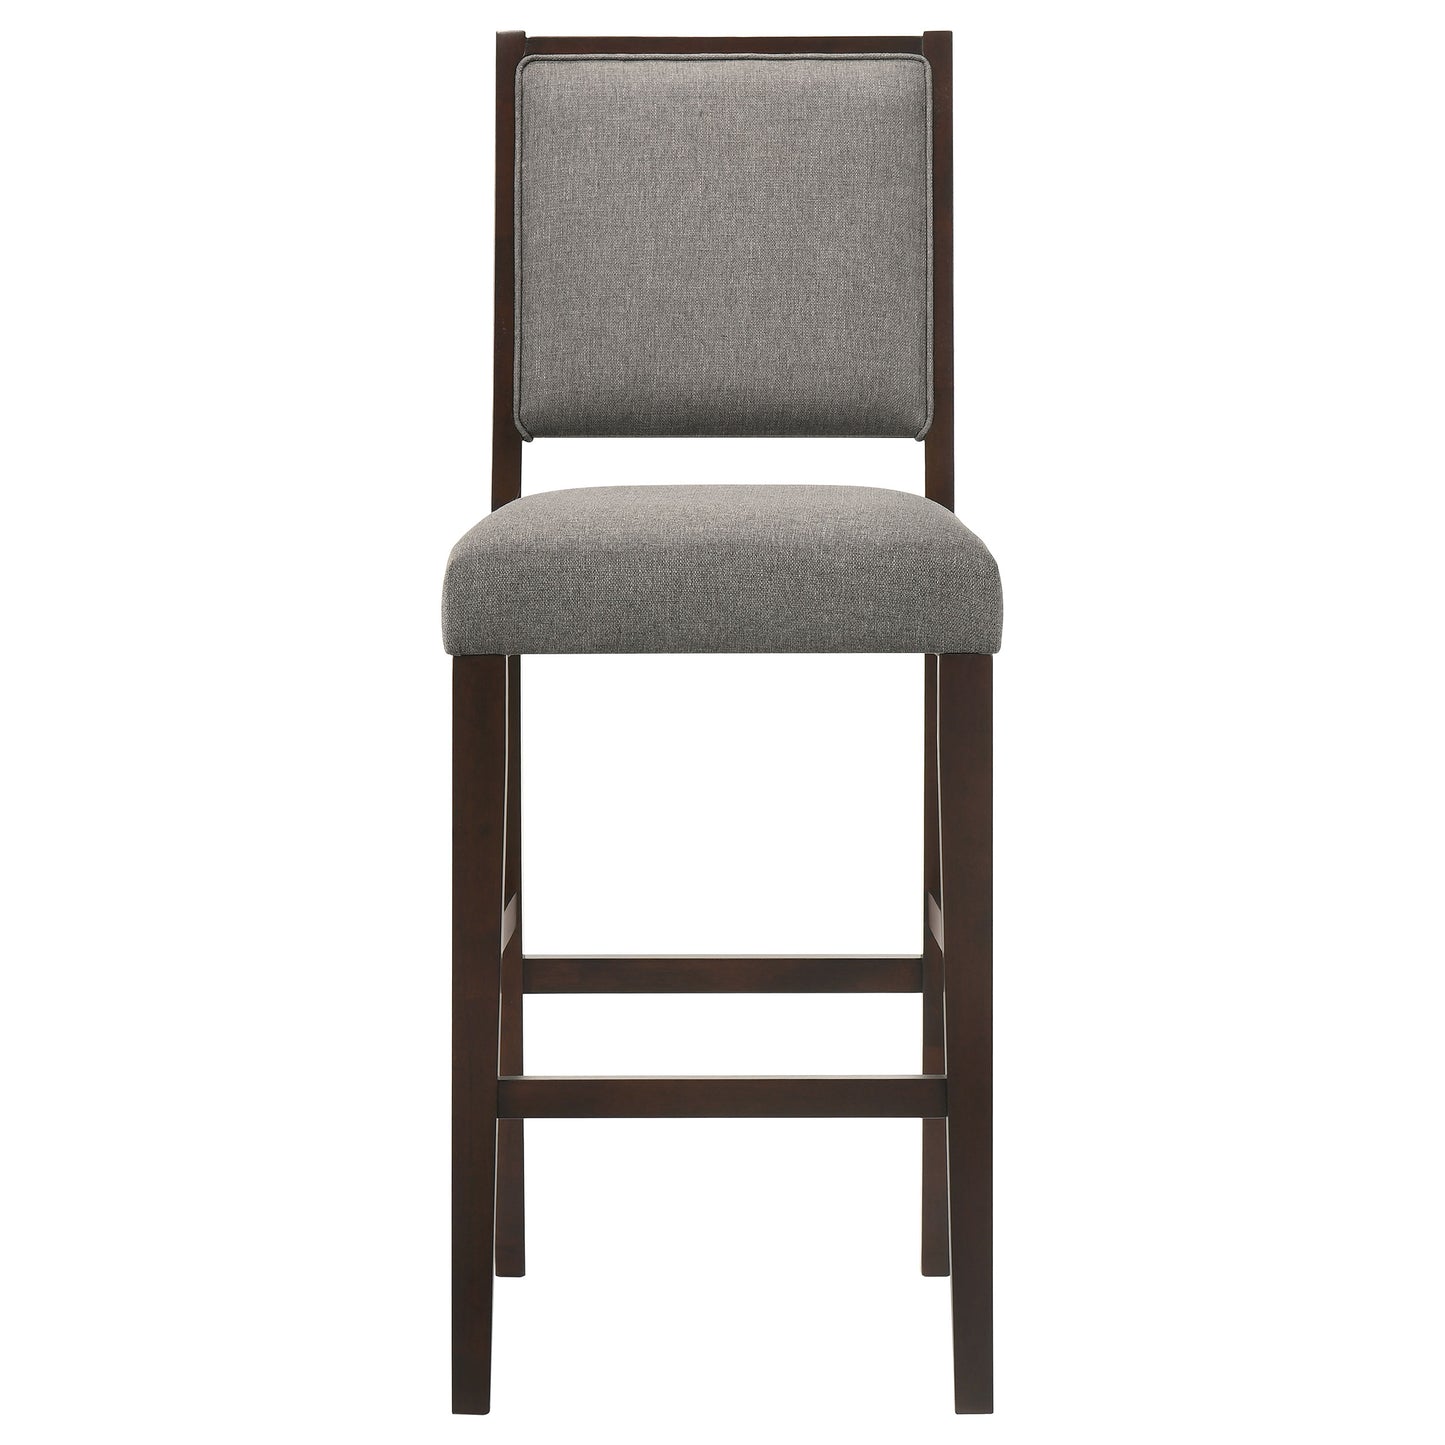 Bedford Upholstered Open Back Bar Stools with Footrest (Set of 2) Grey and Espresso